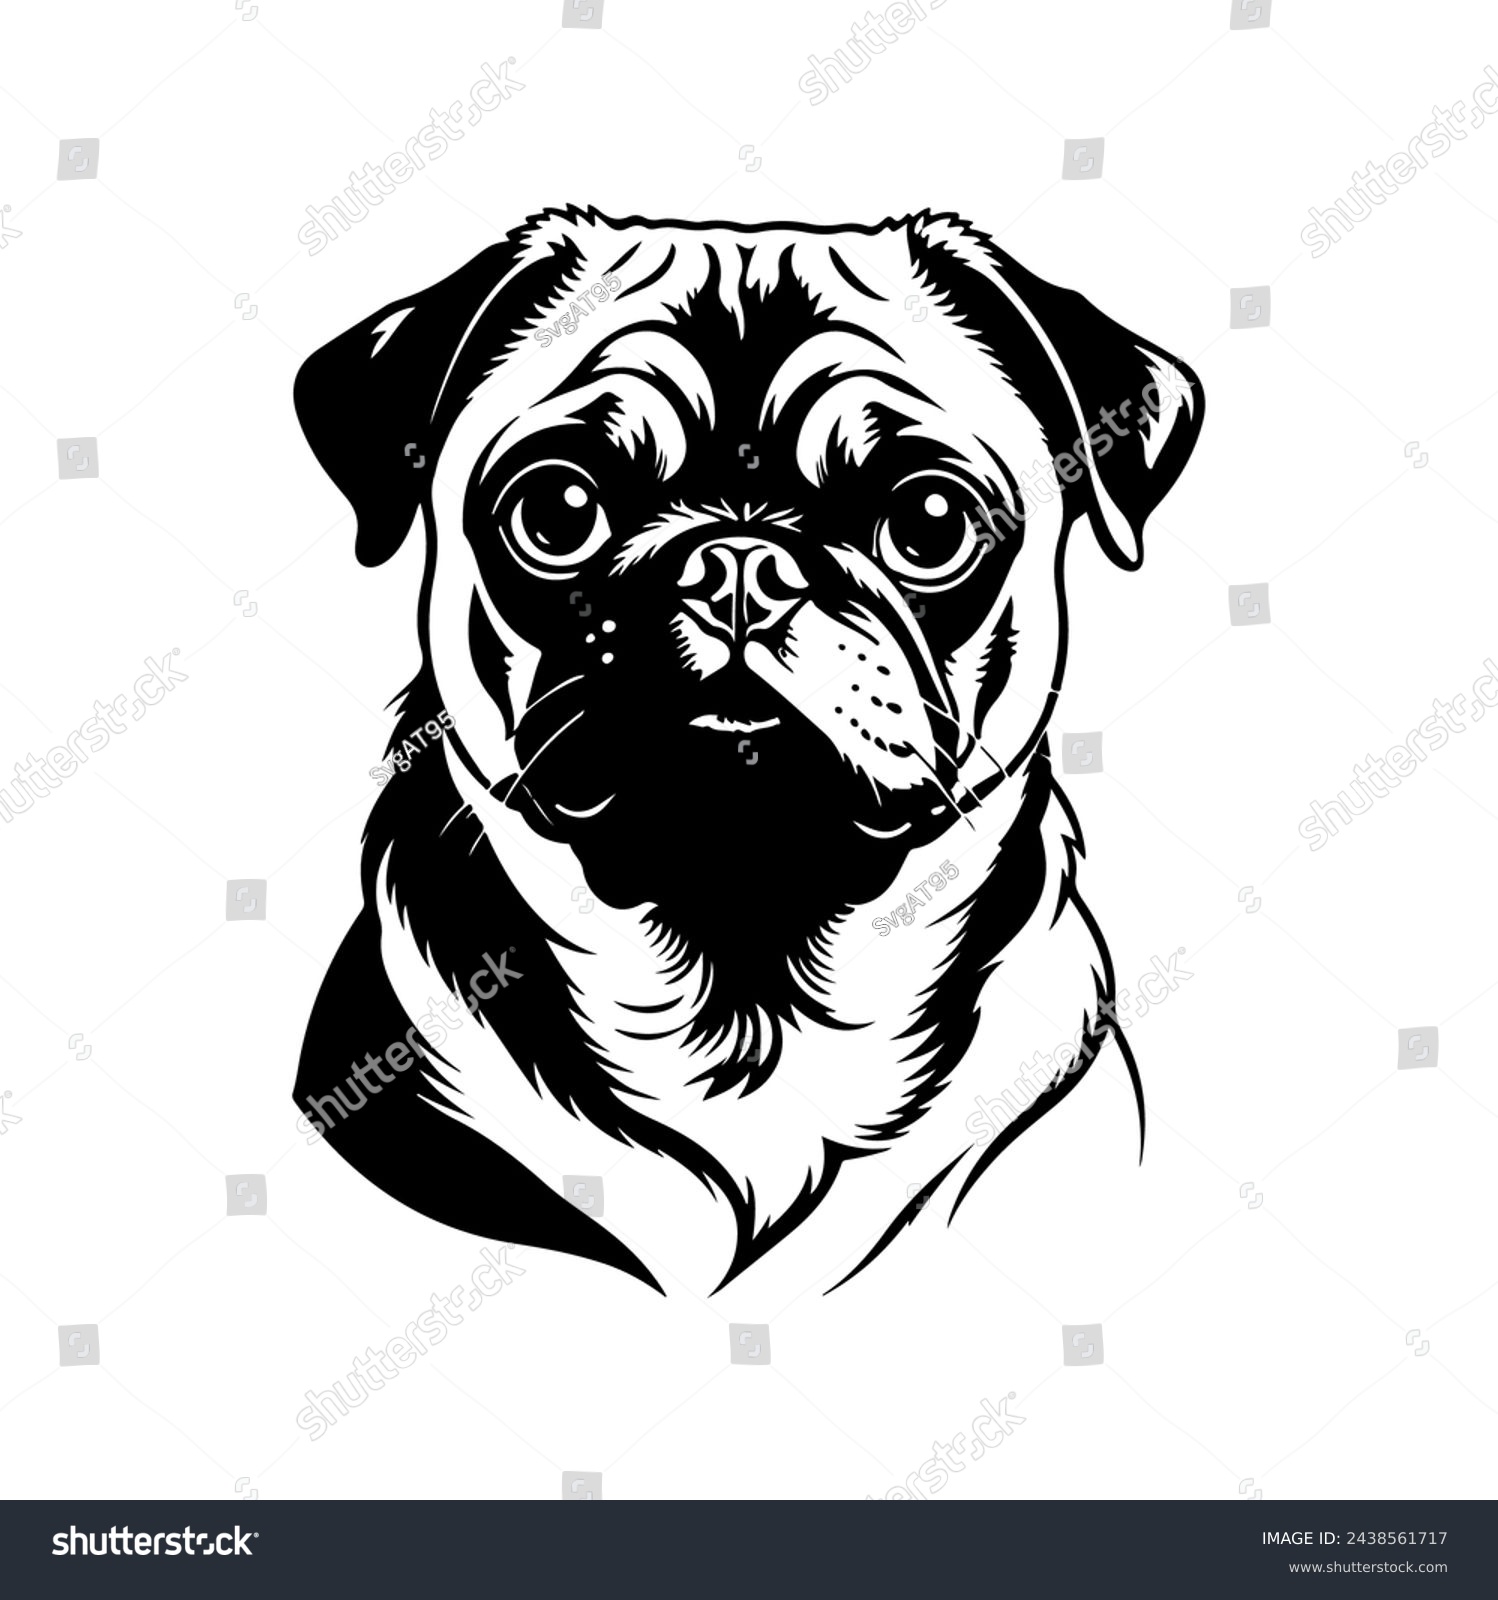 SVG of Portrait of a Pug Dog Vector isolated on white background, Dog Silhouettes. svg